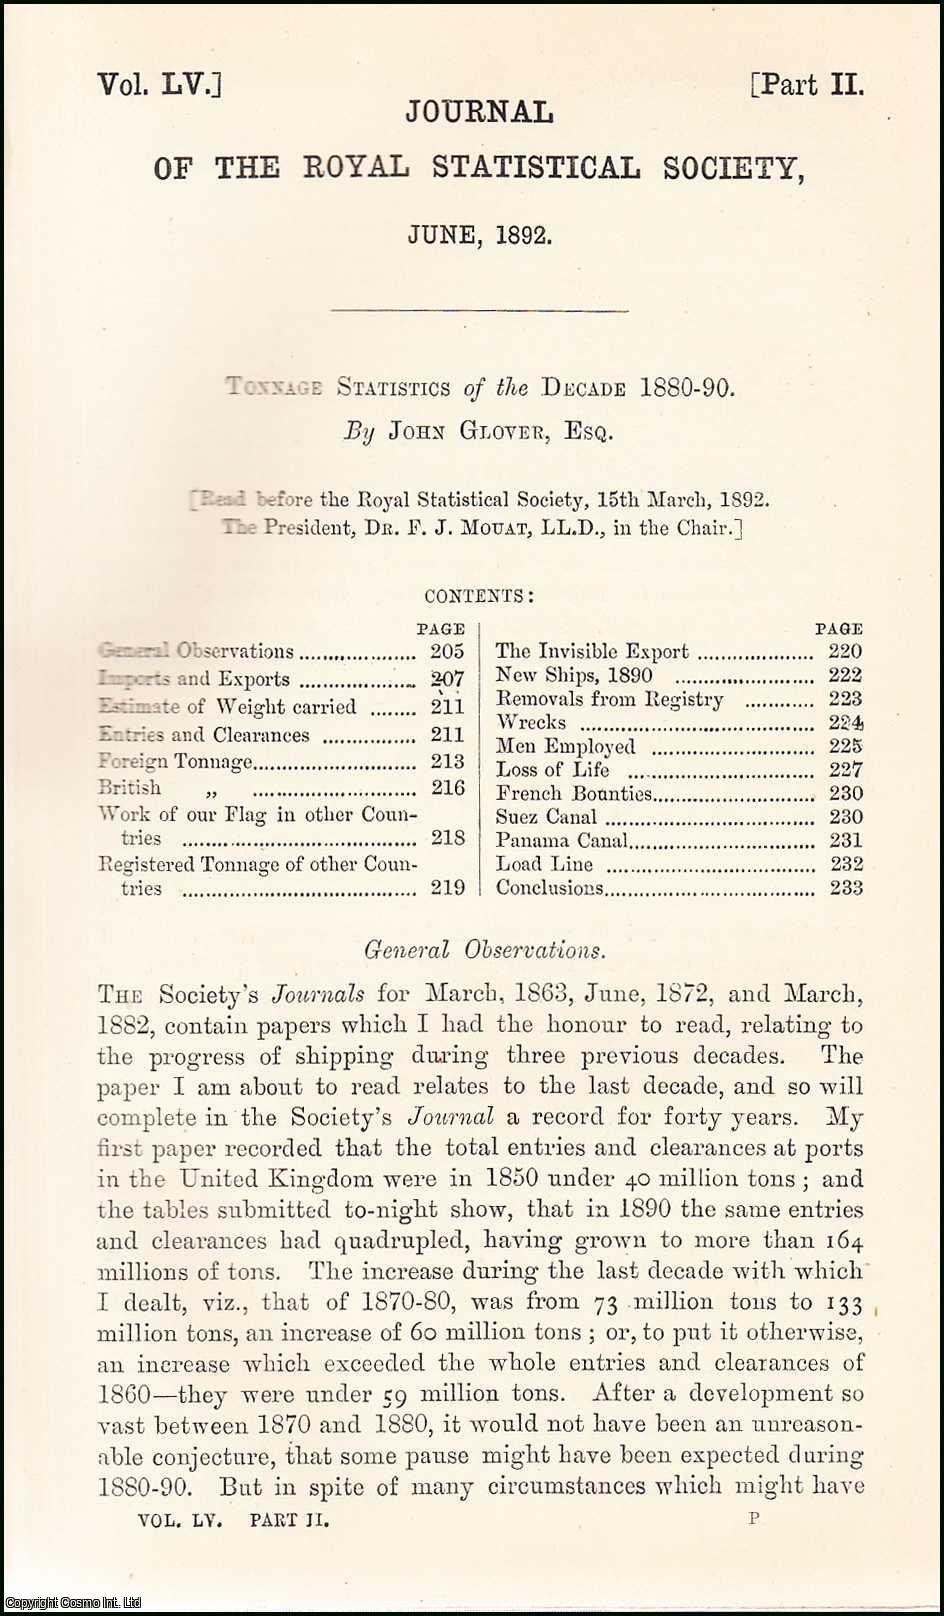 John Glover, Esq. - Tonnage Statistics of the Decade, 1880-90. An uncommon original article from the Journal of the Royal Statistical Society of London, 1892.